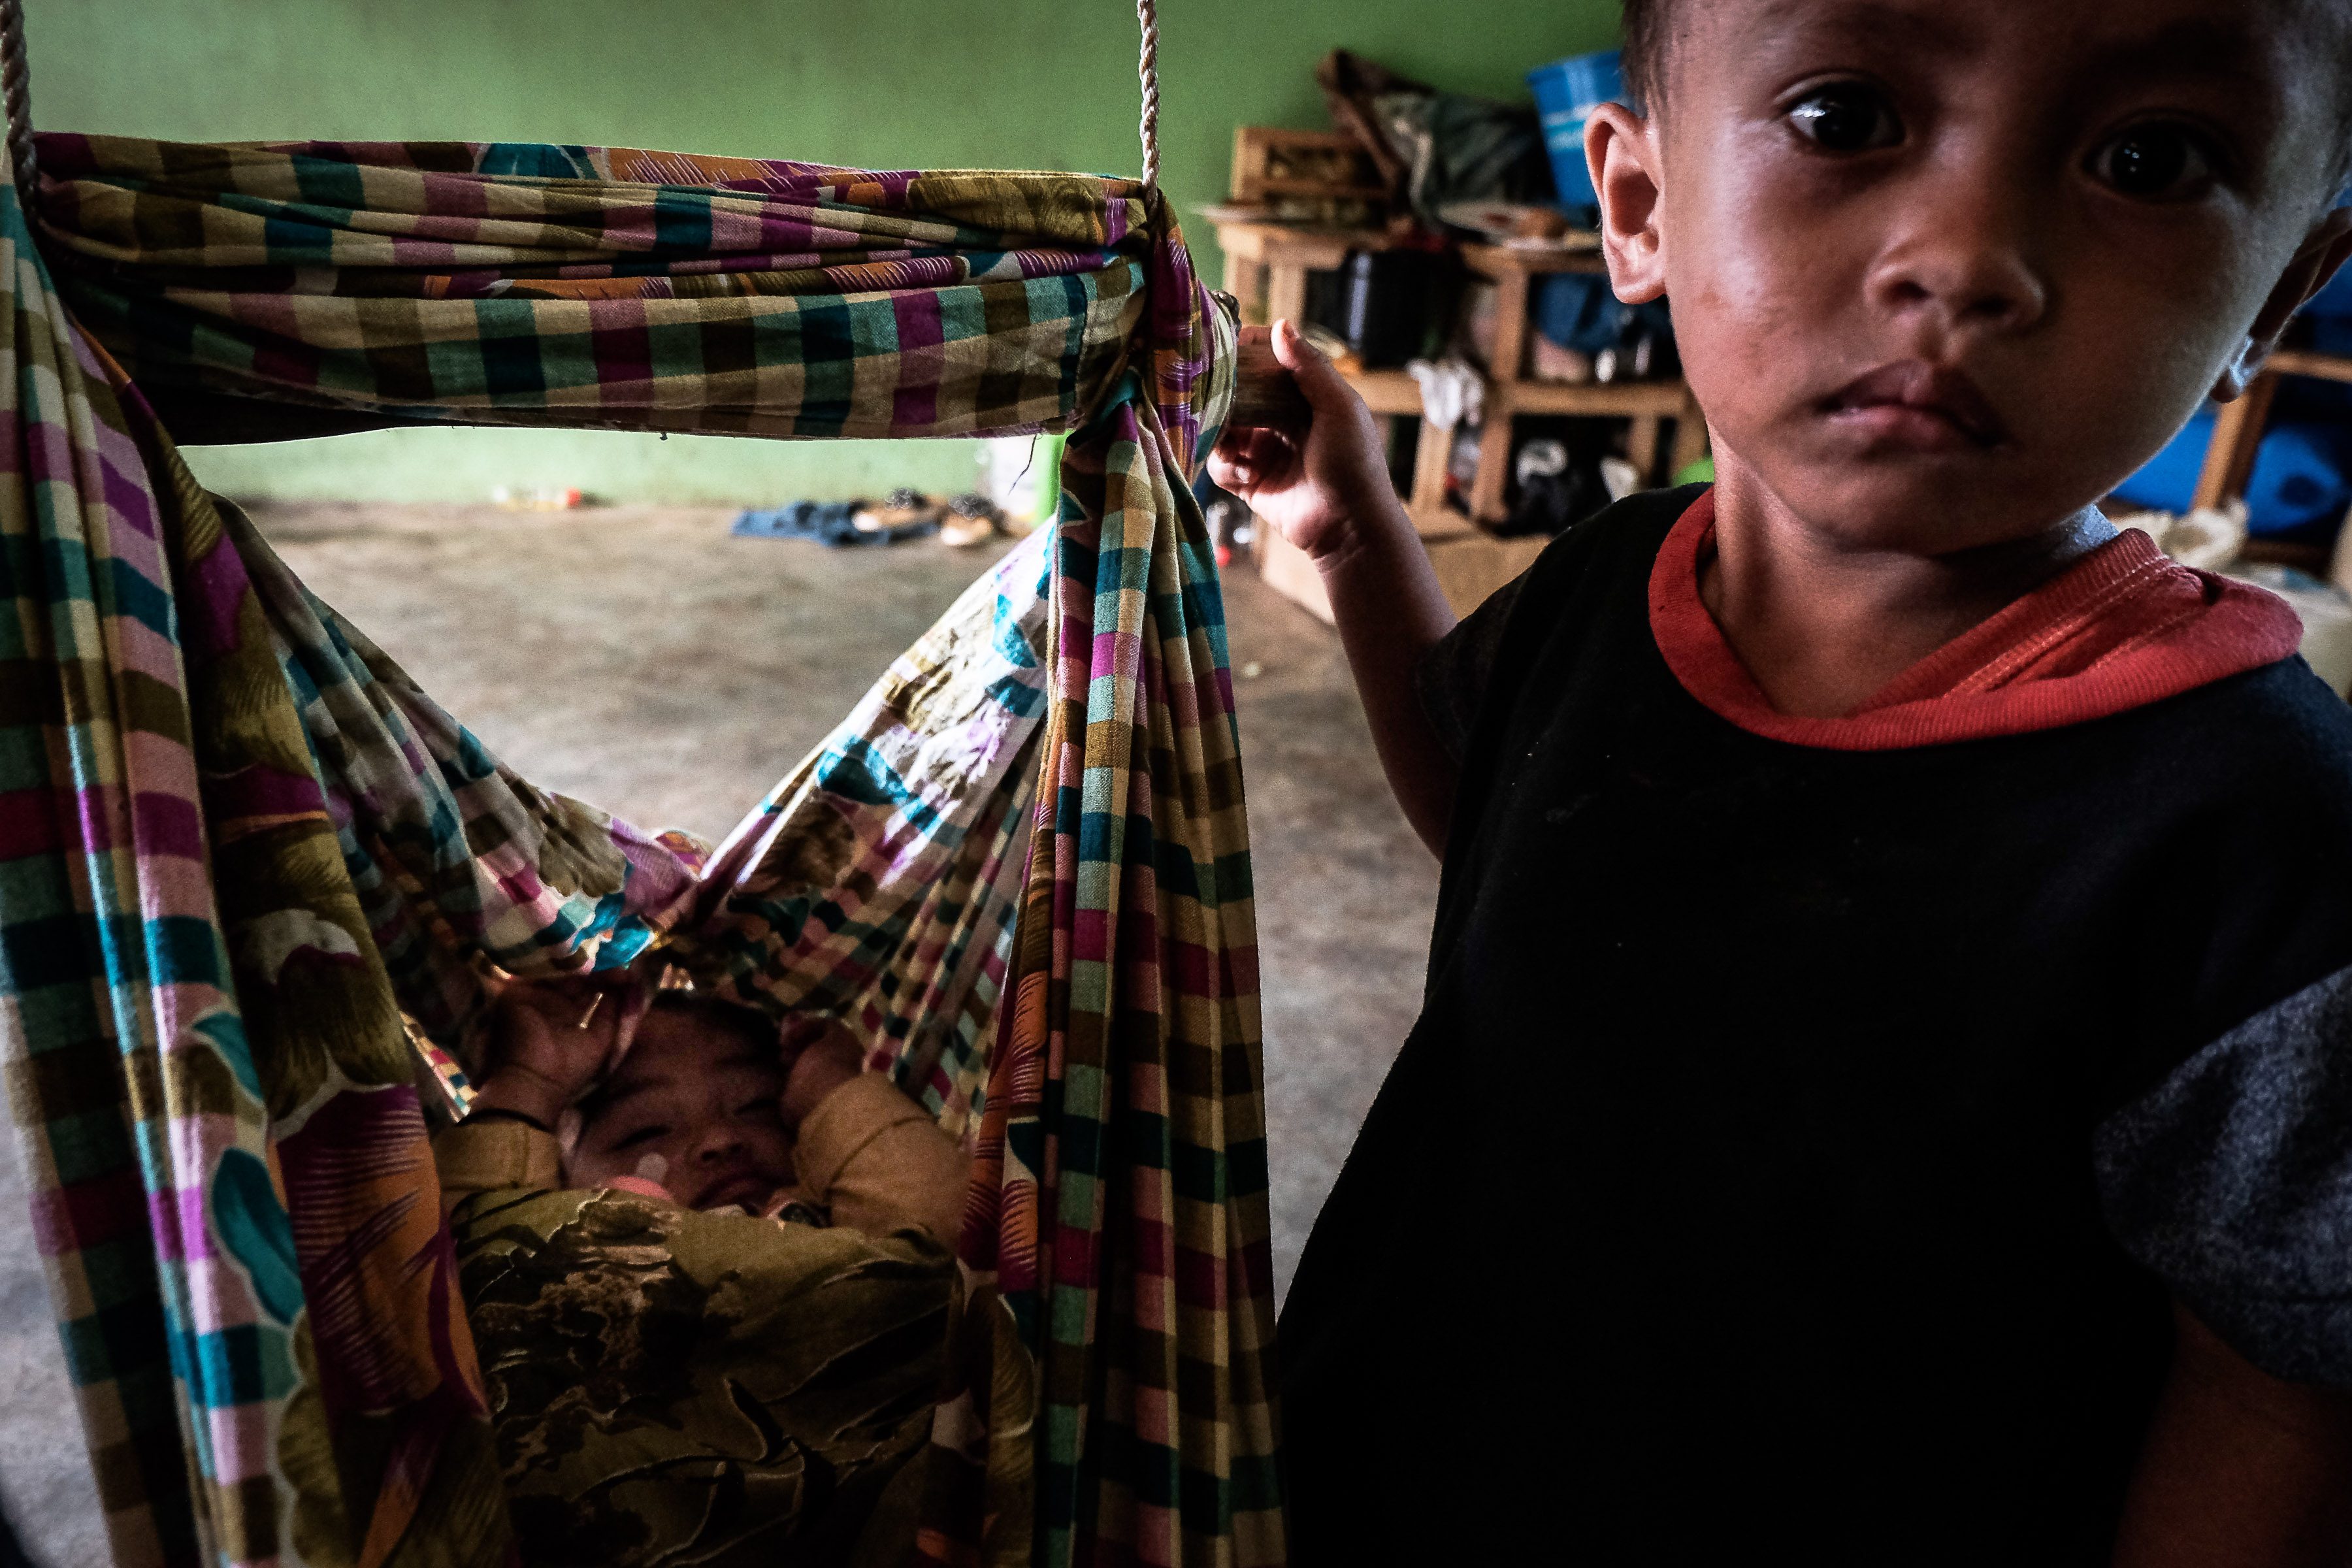 A boy watches over his brother in makeshift hammock inside a wornout classroom that serves as their evacuation center in in Barangay Bubong, Pantao Ragat, Lanao del Norte.  